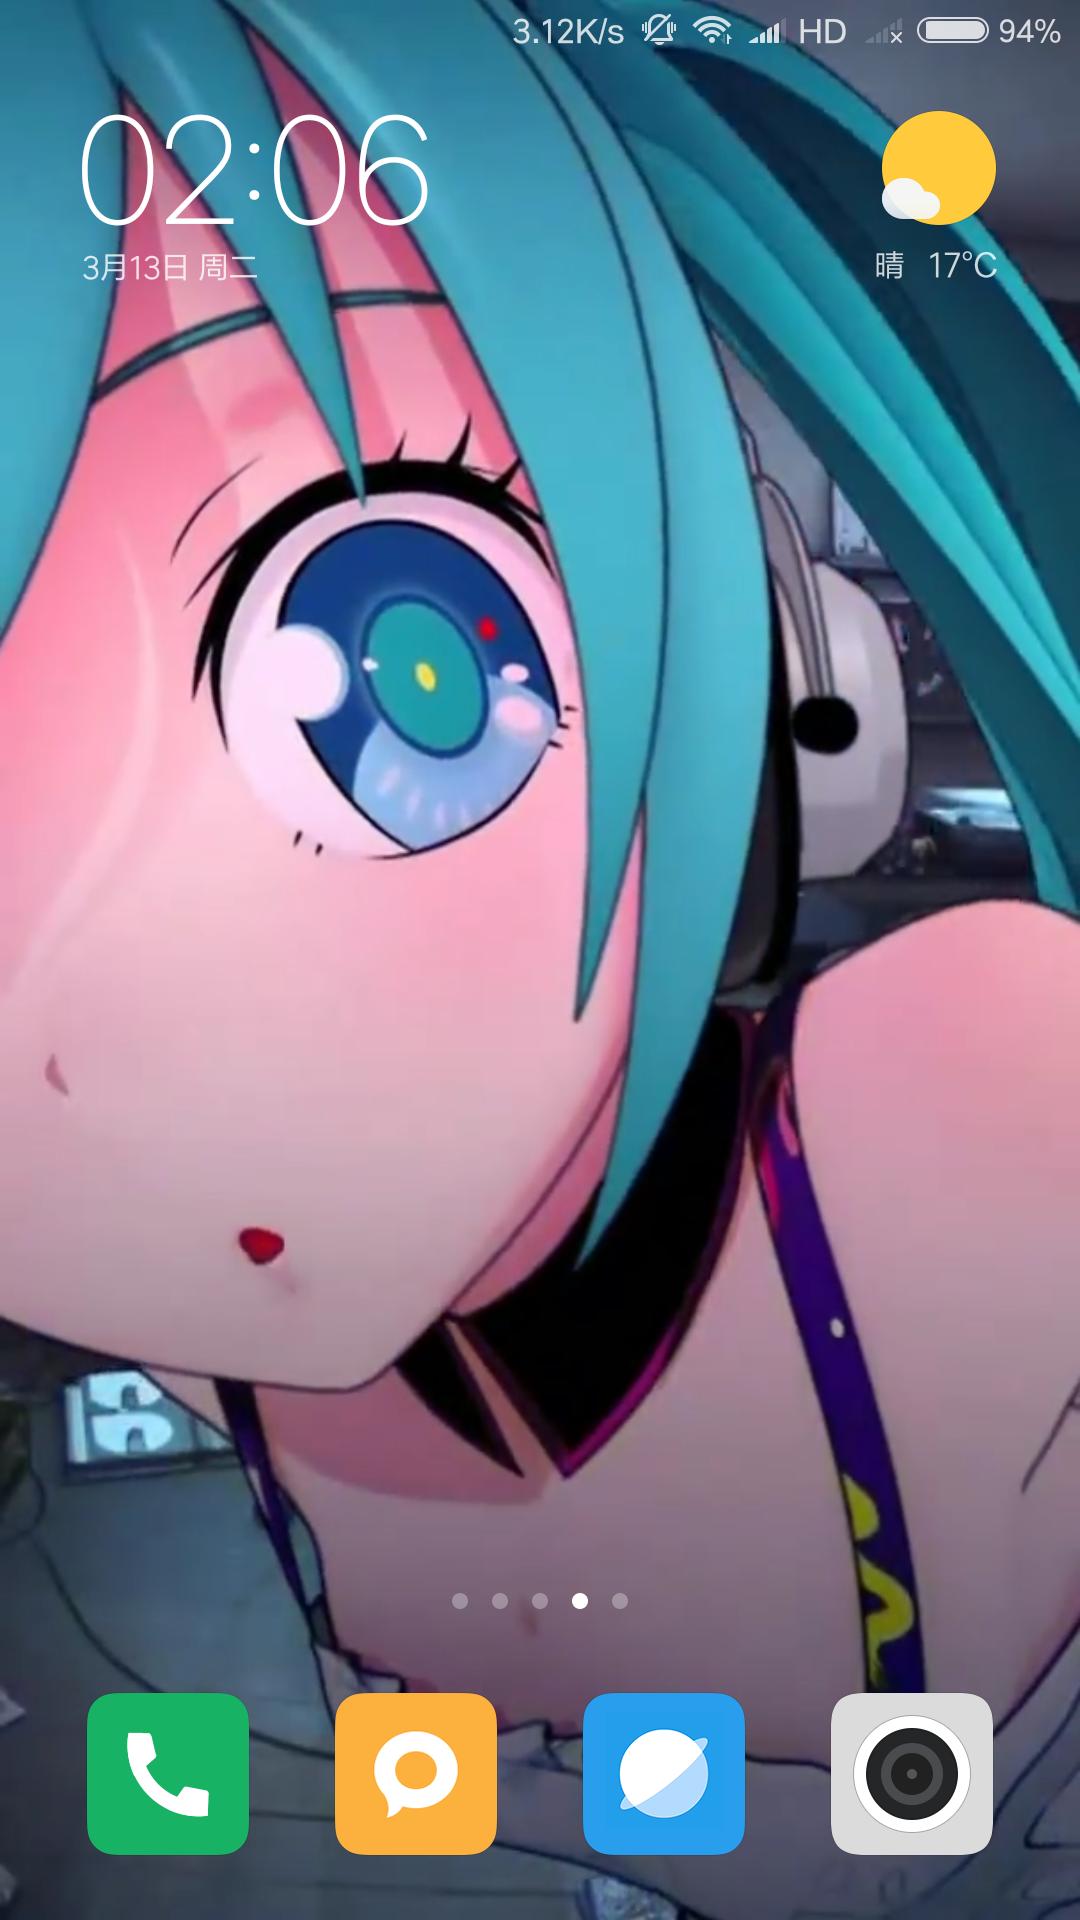 Hatsune Miku Video Live Wallpaper Redial 初音ミク For Android Apk Download